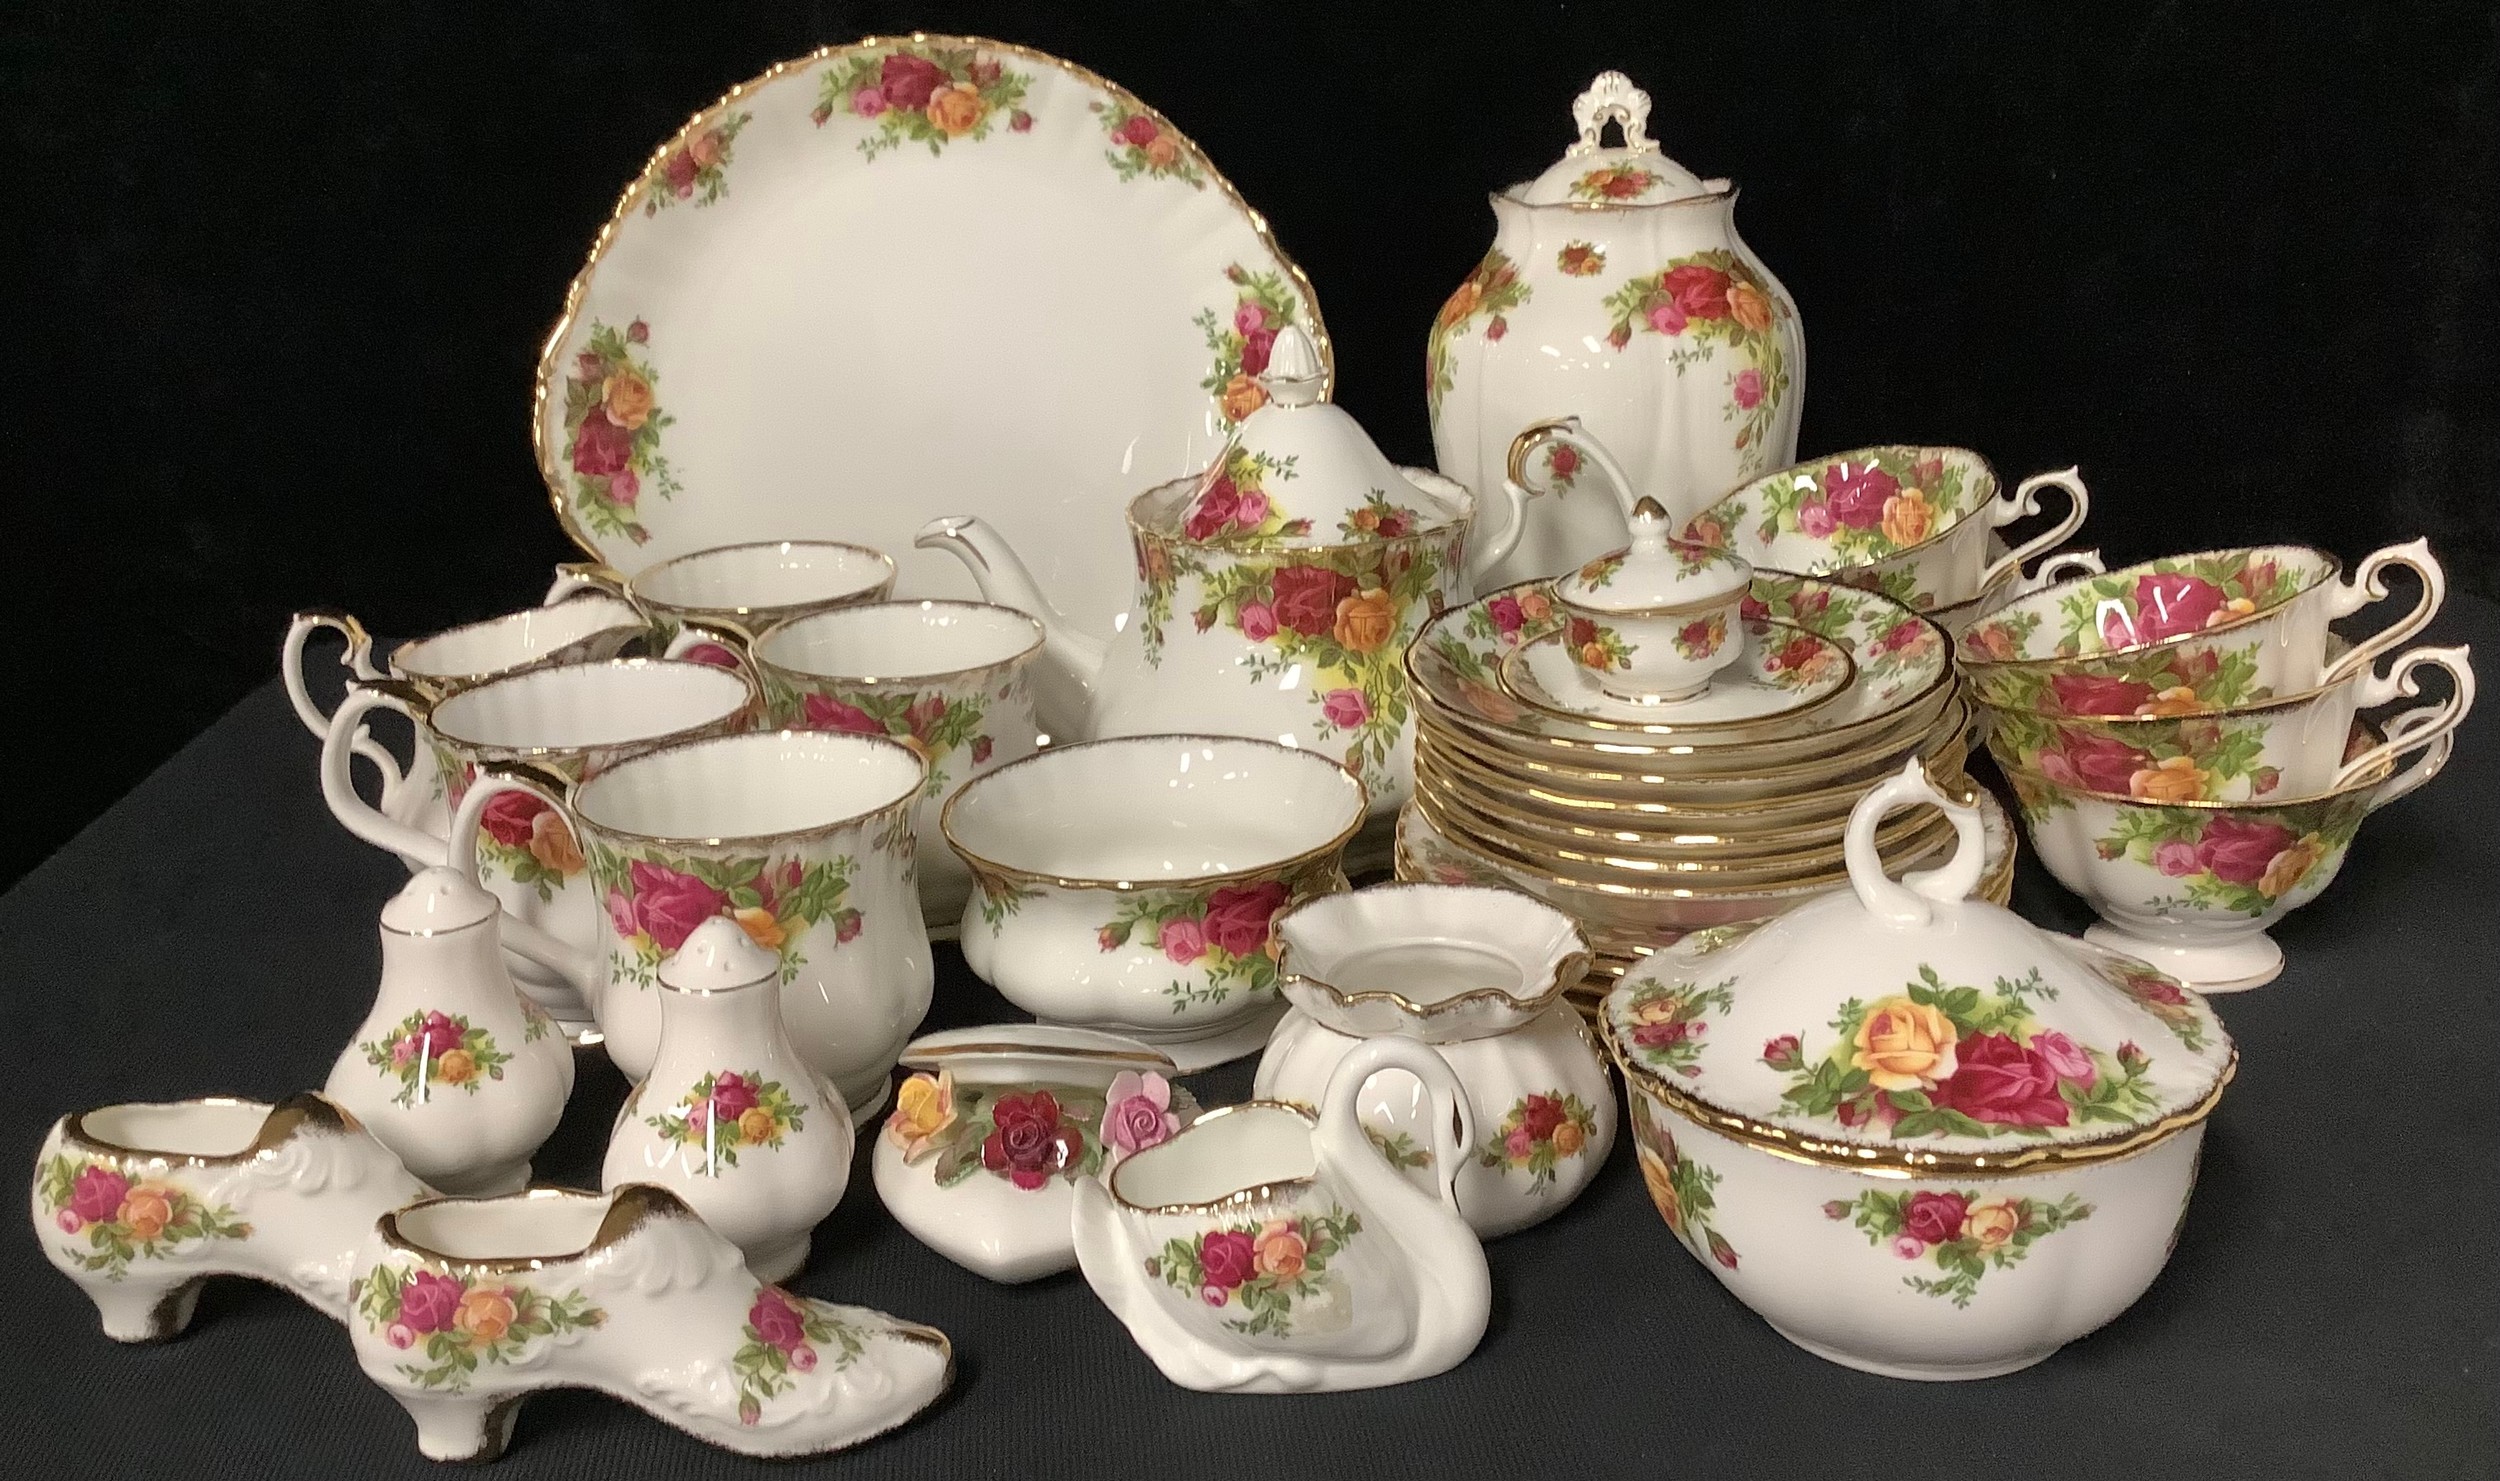 A Royal Albert Old Country Roses pattern teapot, six teacups, saucers and tea plates, sandwich